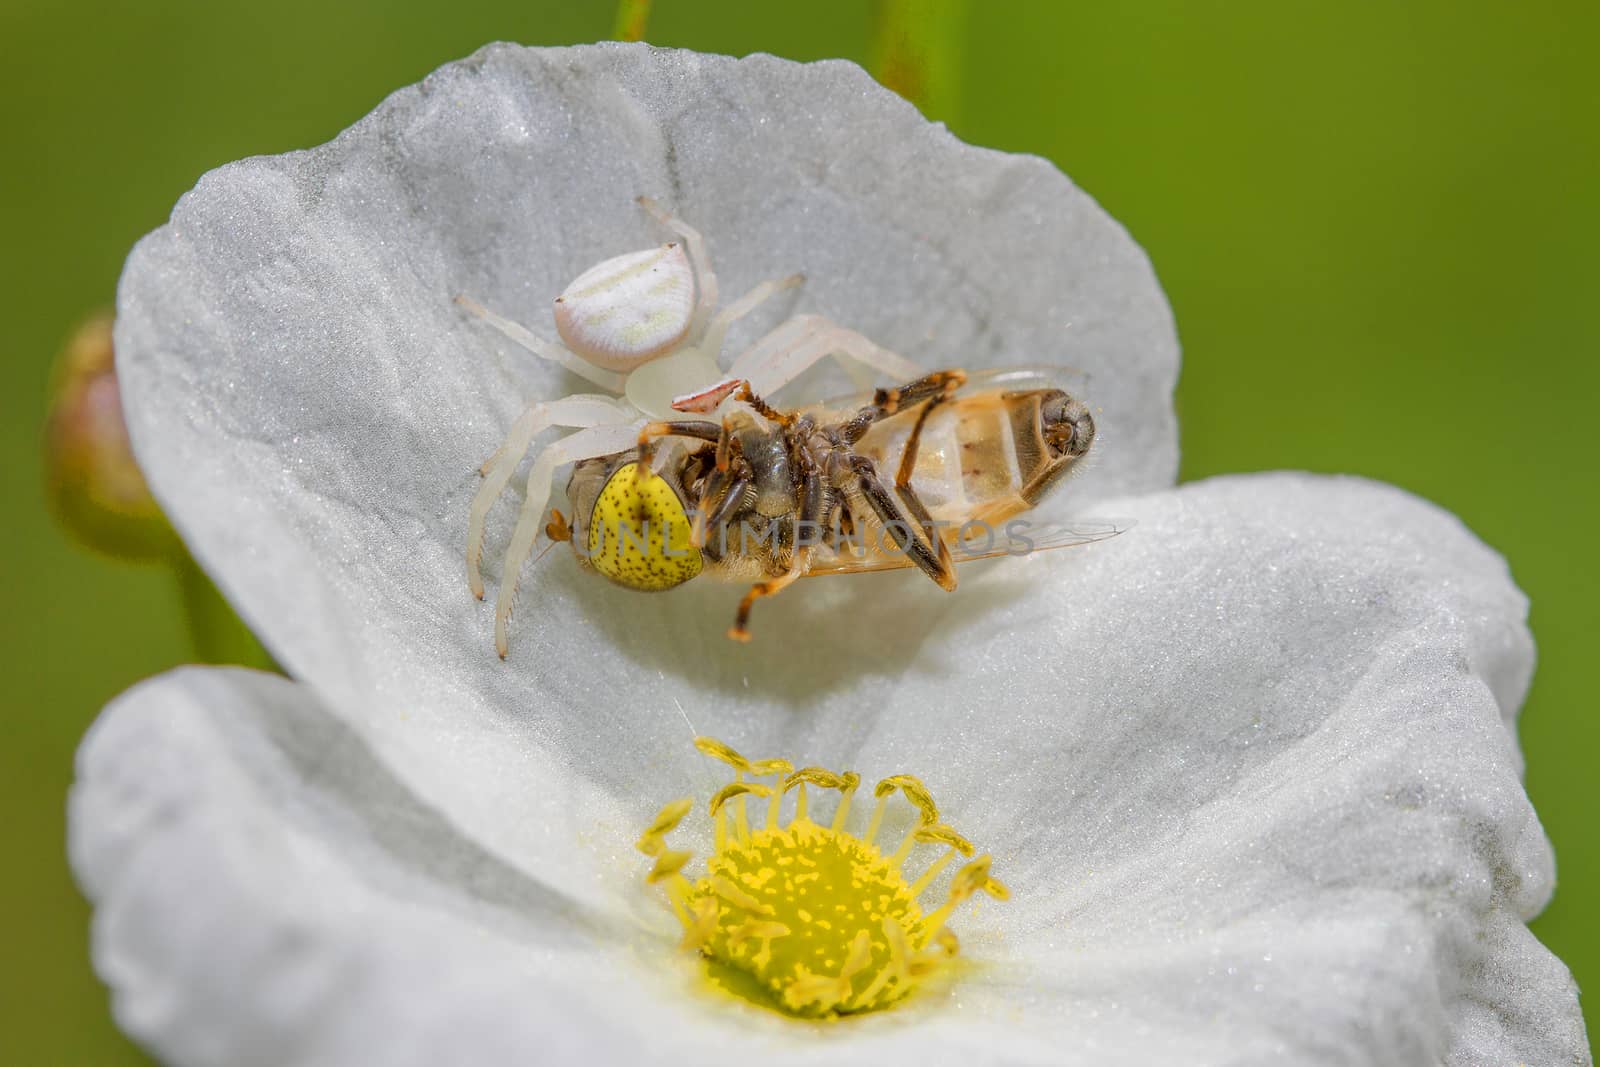 The white spider catches the bait on white flowers.